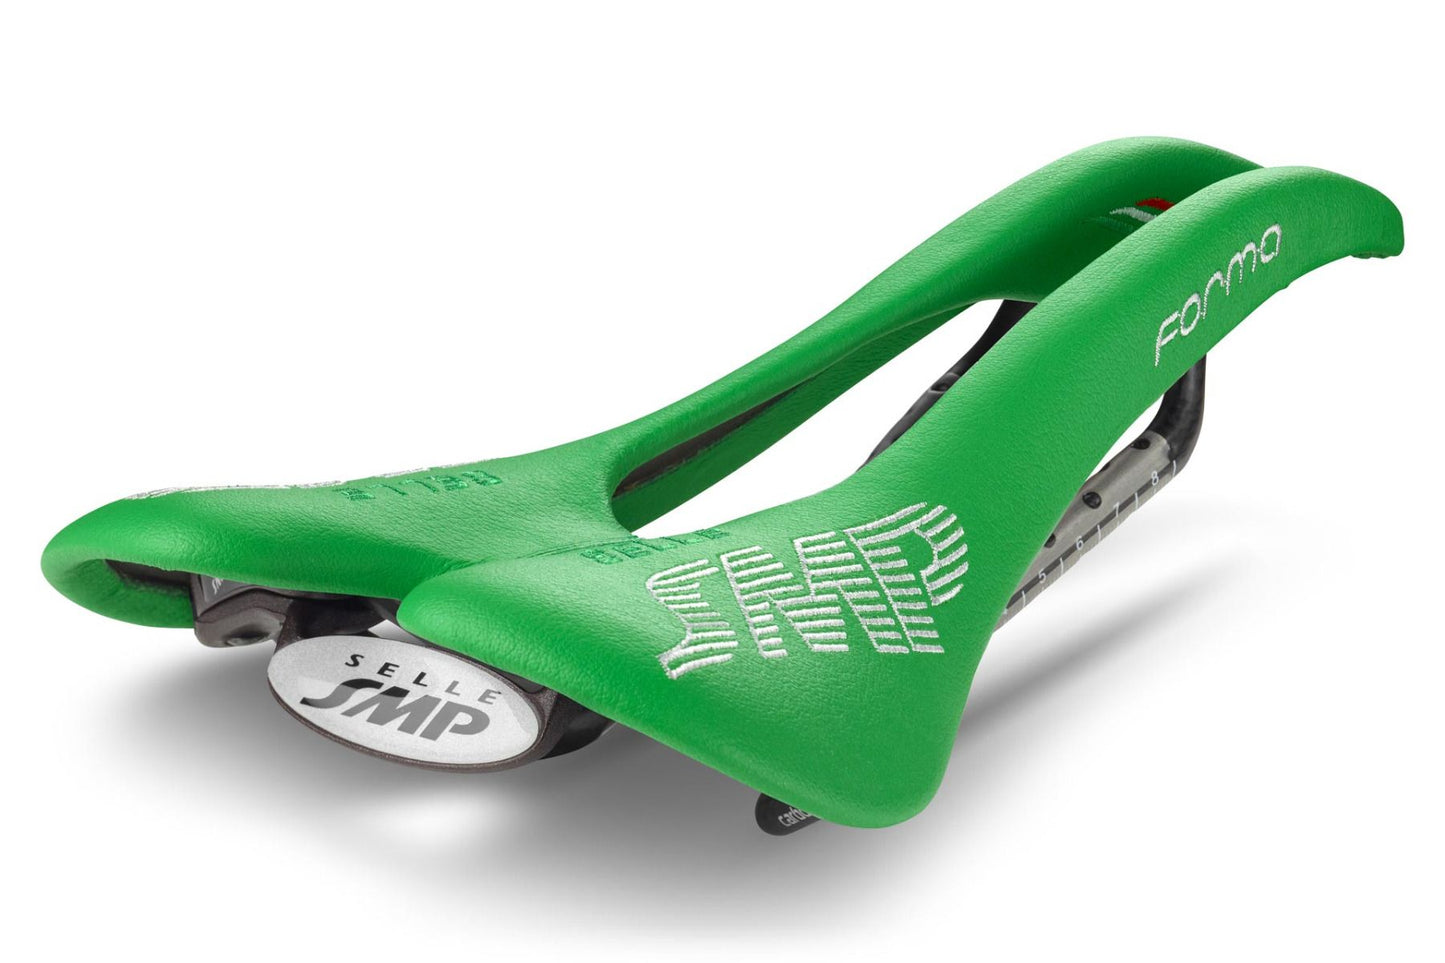 Selle SMP Forma Saddle with Carbon Rails (Green)